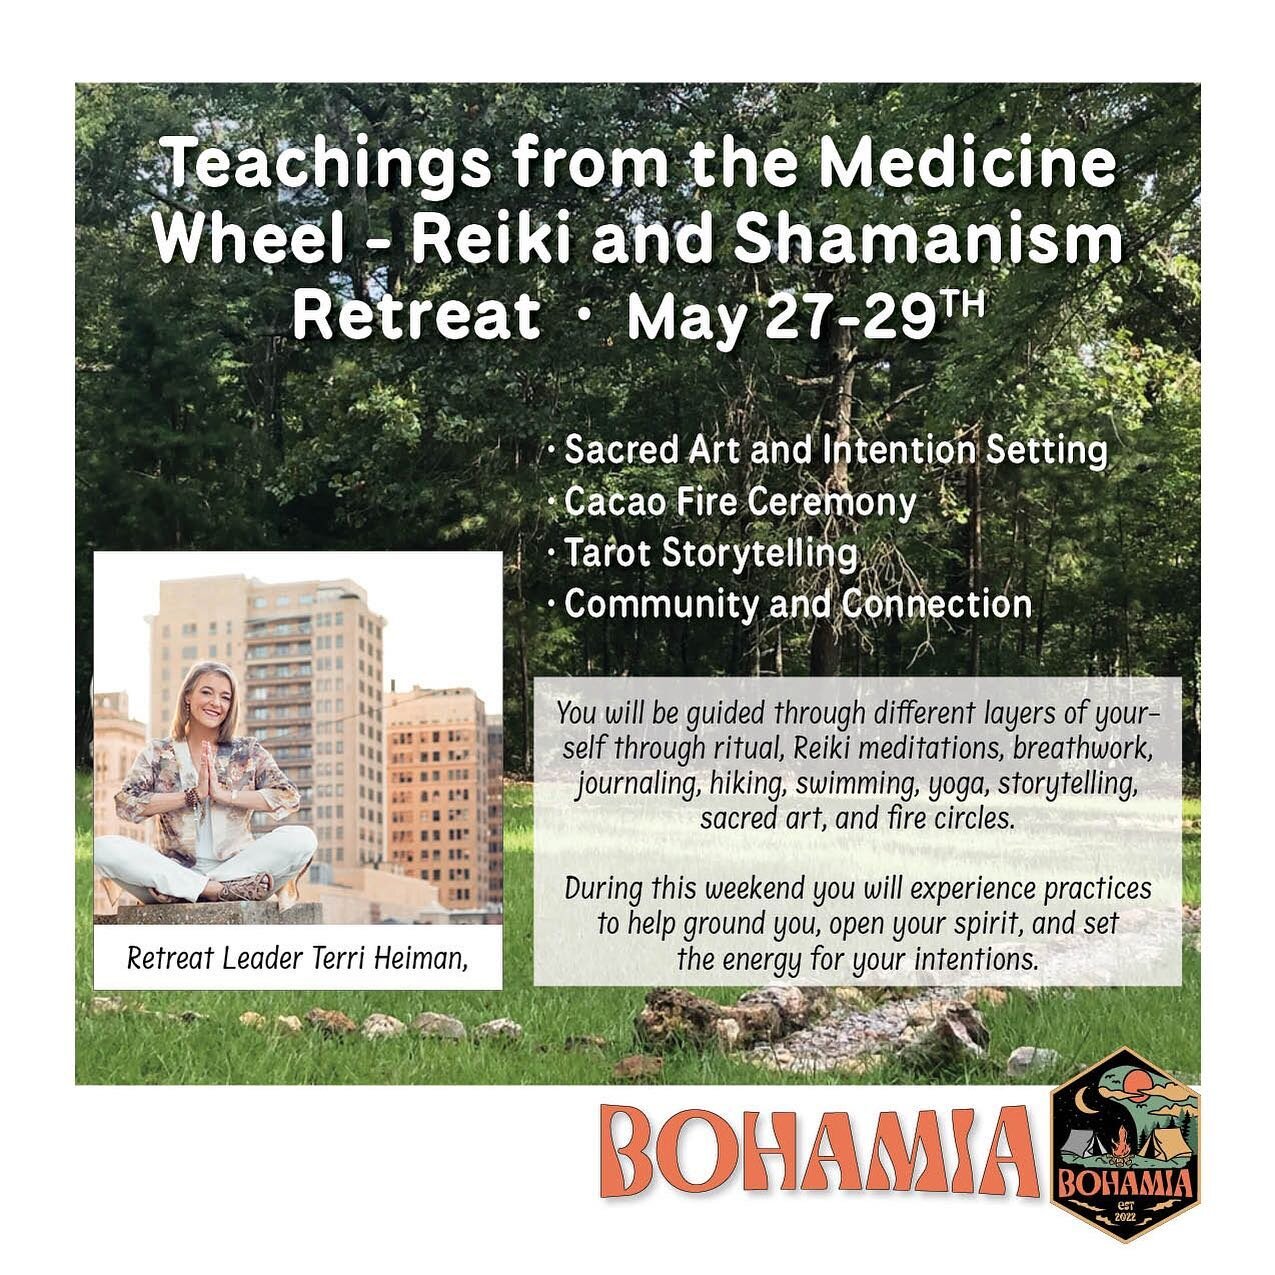 Join Terri Heiman at @land_of_bohamia May 27-29 for &ldquo;Teachings from the Medicine Wheel&rdquo; - an immersive weekend retreat of reiki, shamanism, and intention setting. All glamping spots are booked but we still have nearby RV and camp options 